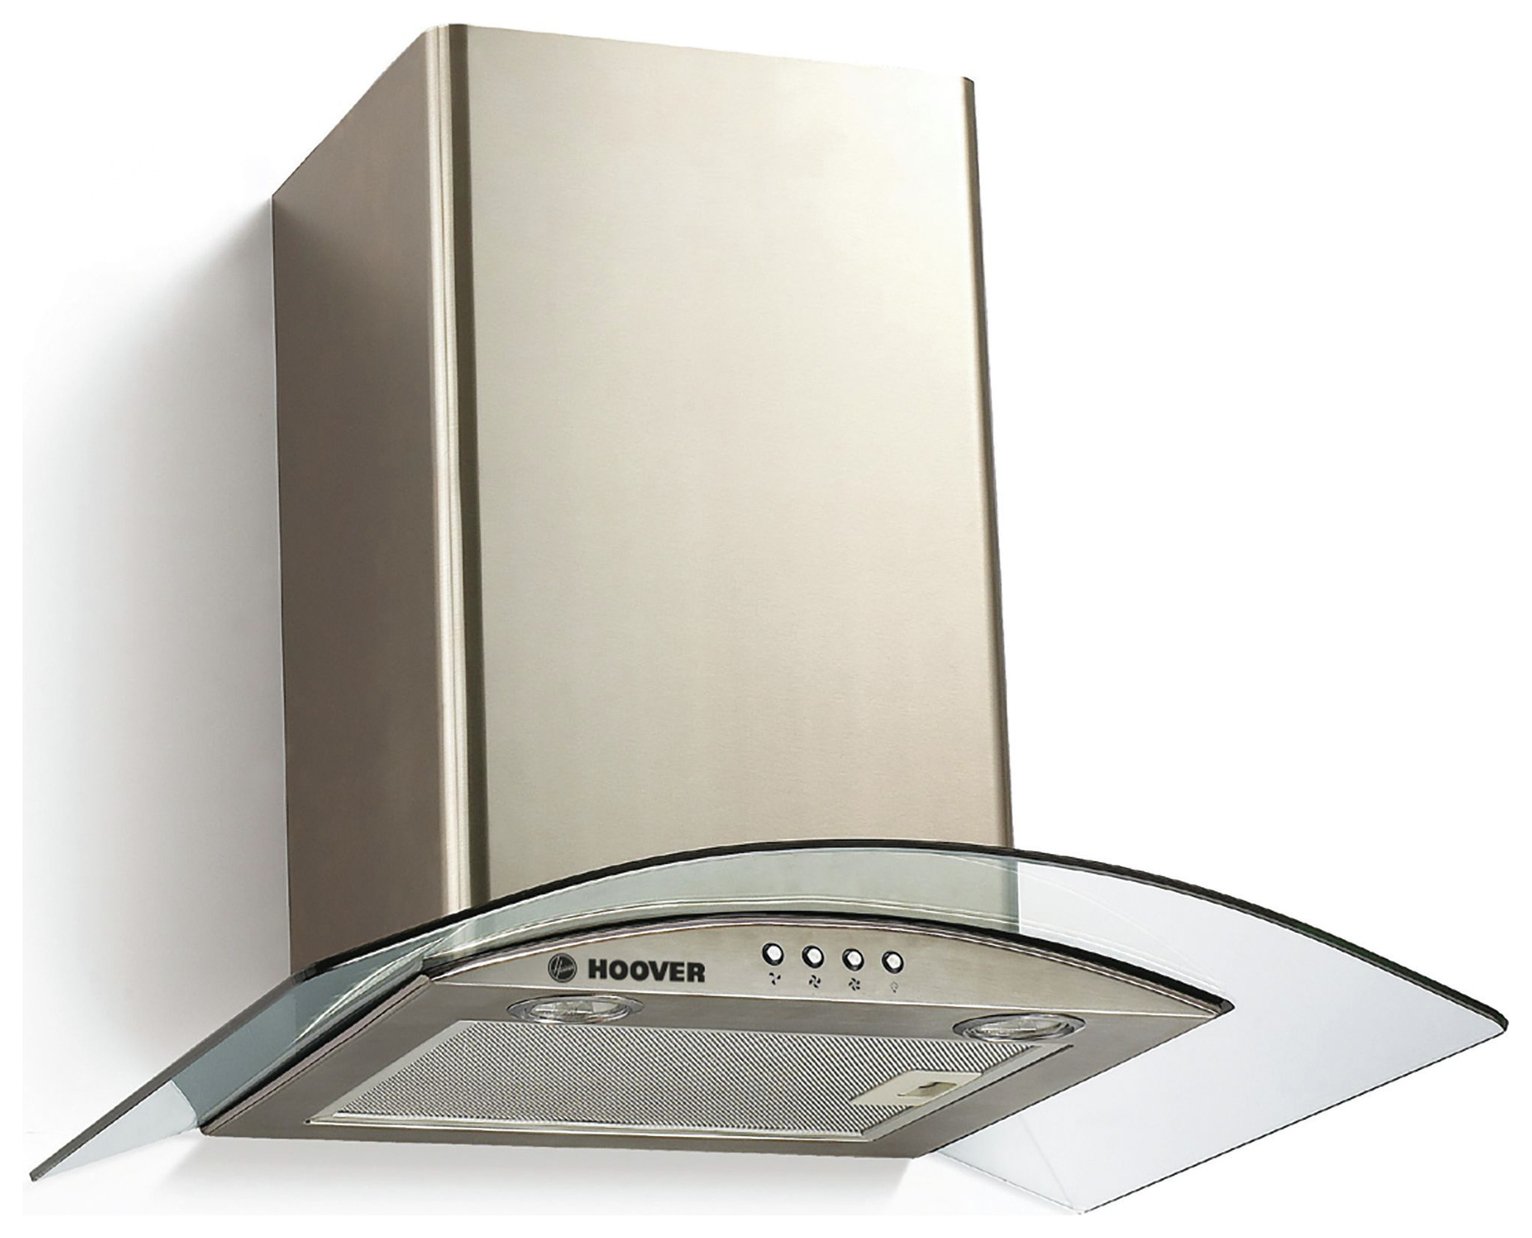 Hoover HGM600X1 Cooker Hood - Stainless Steel